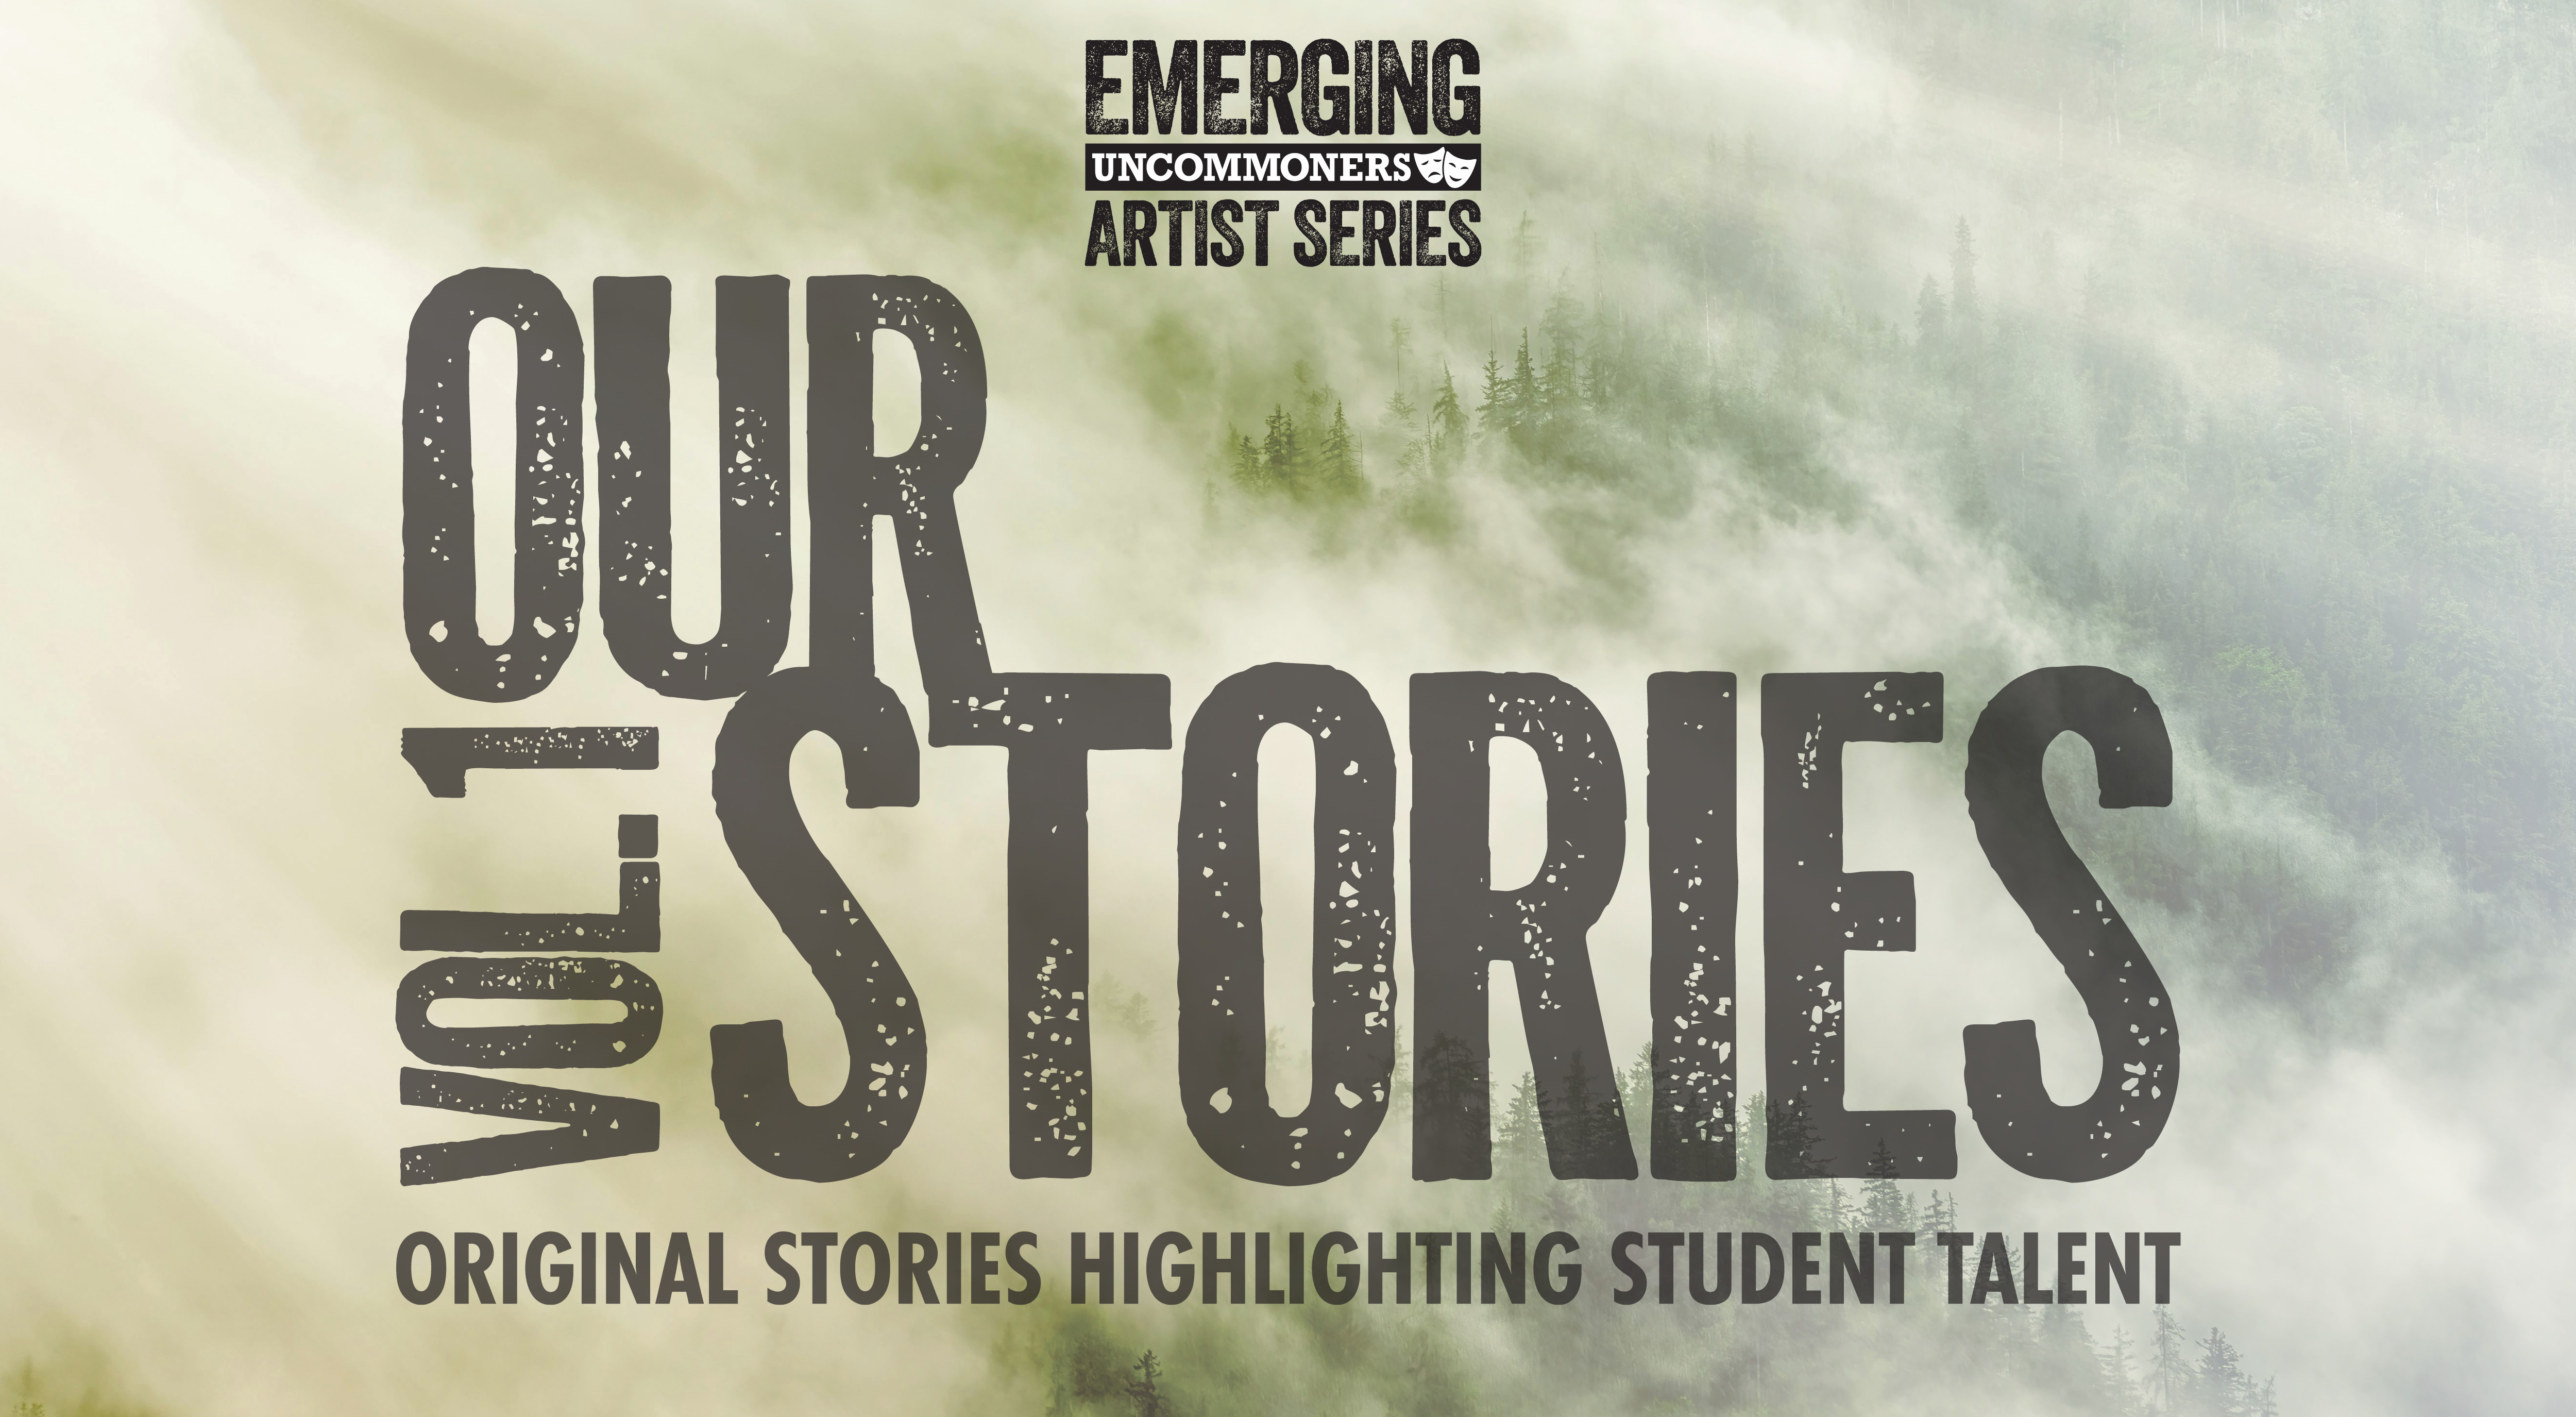 Our Stories banner with trees in background, text in foreground - Emerging Uncommoners Artist Series, Our Stories Vol. 1, Original Stories Highlighting Student Talent